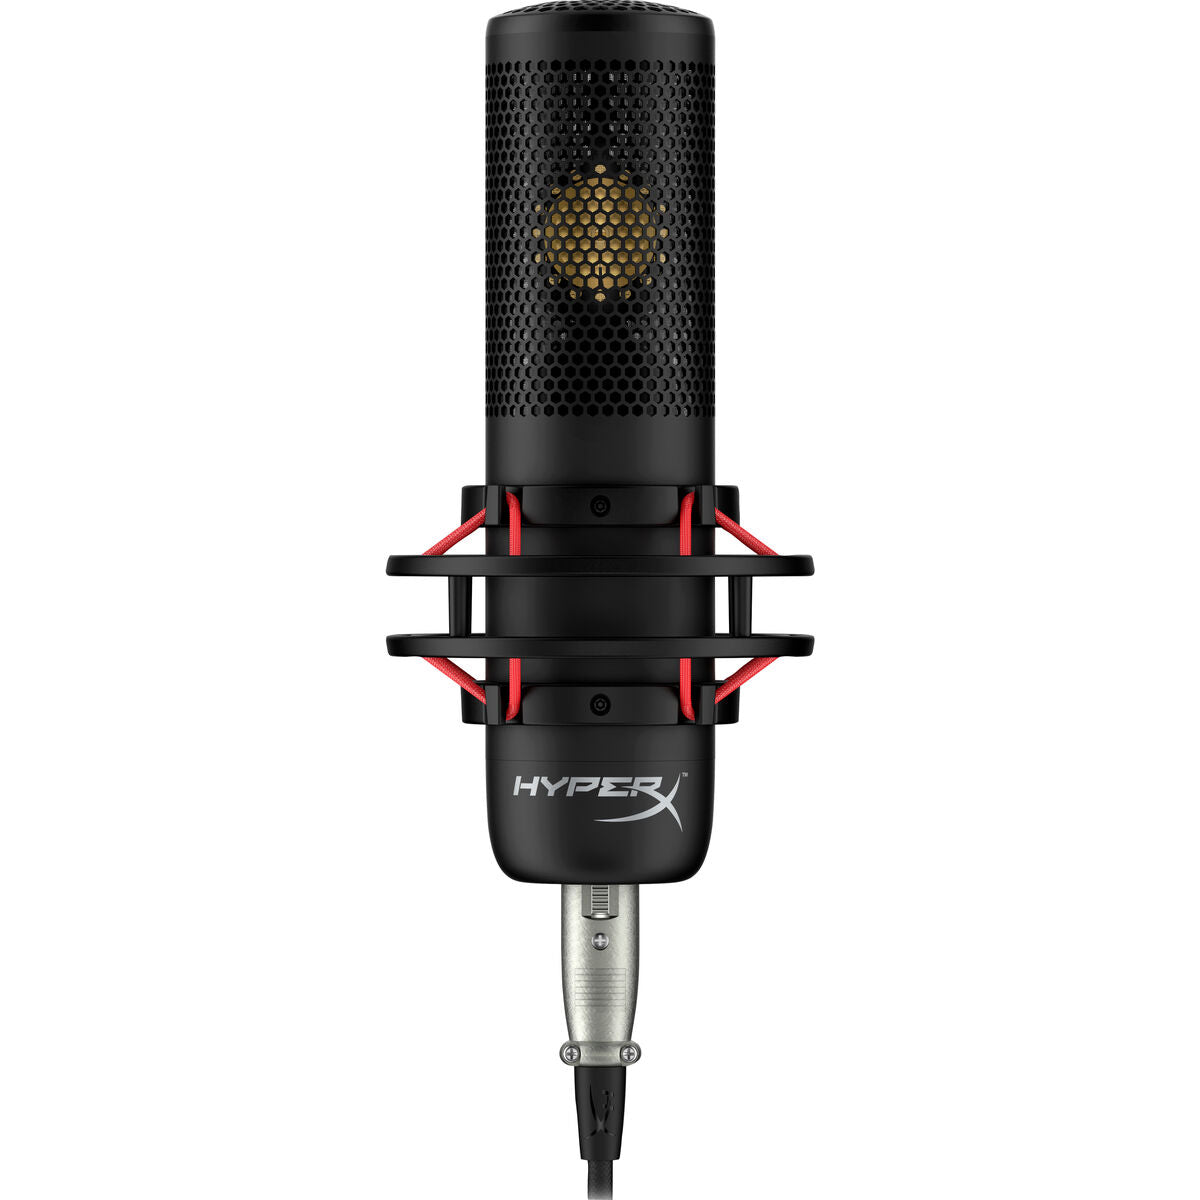 Microphone Hyperx ProCast Microphone, Hyperx, Computing, Accessories, microphone-hyperx-procast-microphone, :Microphone, Brand_Hyperx, category-reference-2609, category-reference-2642, category-reference-2847, category-reference-t-19685, category-reference-t-19908, category-reference-t-21340, computers / peripherals, Condition_NEW, entertainment, gadget, music, office, Price_300 - 400, Teleworking, RiotNook